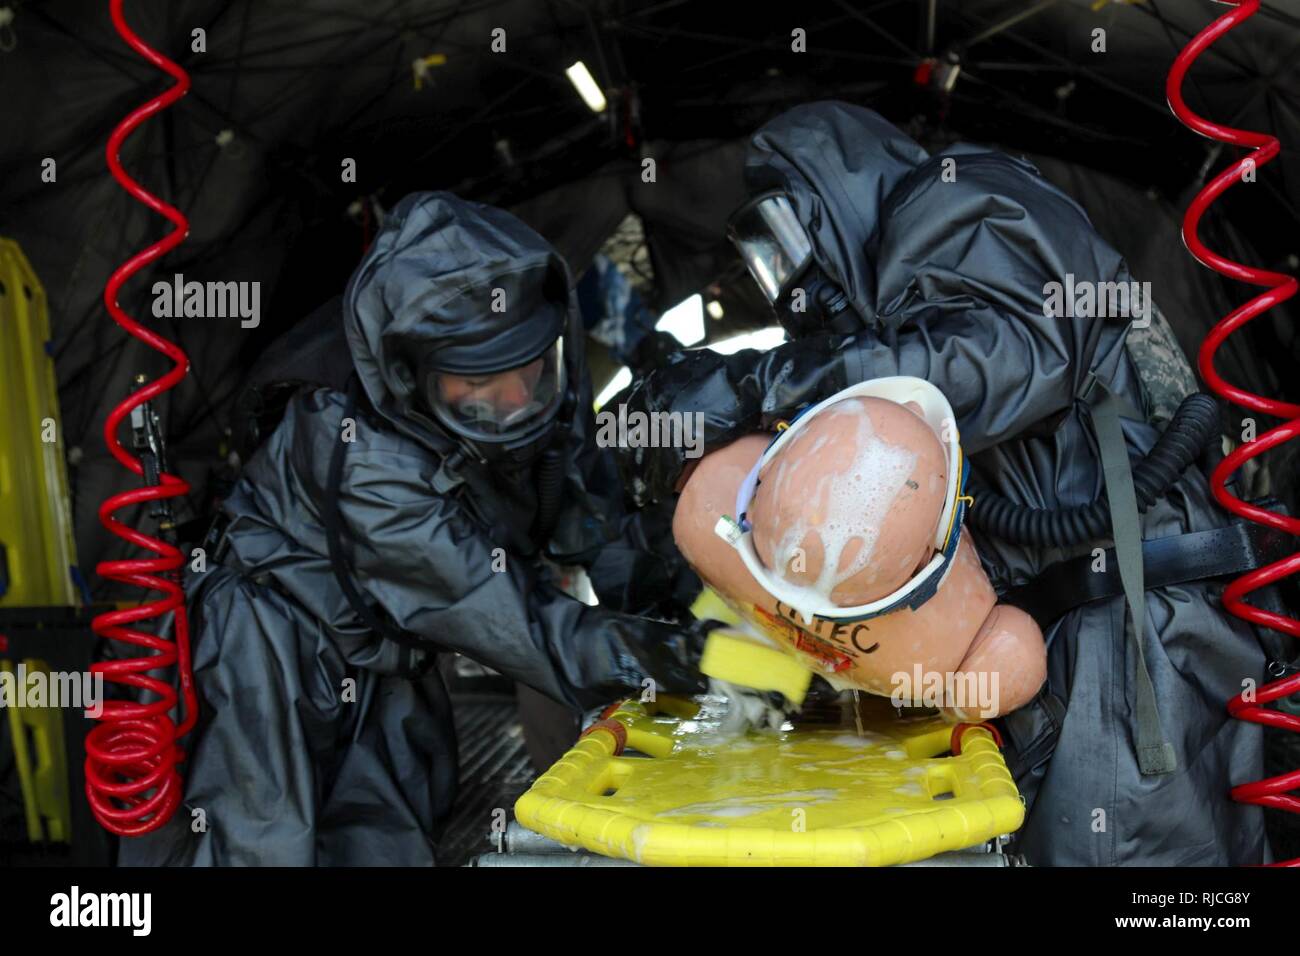 Soldiers assigned to the 414th Chemical Company from Orangeburg, South Carolina wash a simulated casualty during a Joint Training Exercise hosted by the Homestead-Miami Speedway and Miami-Dade Fire Department in Miami, Florida. Jan. 11, 2018. This JTE focused on building response capabilities and the seamless transition between the local first responders and the follow-on support provided by the National Guard and Active duty soldiers. (U. S. Army Stock Photo